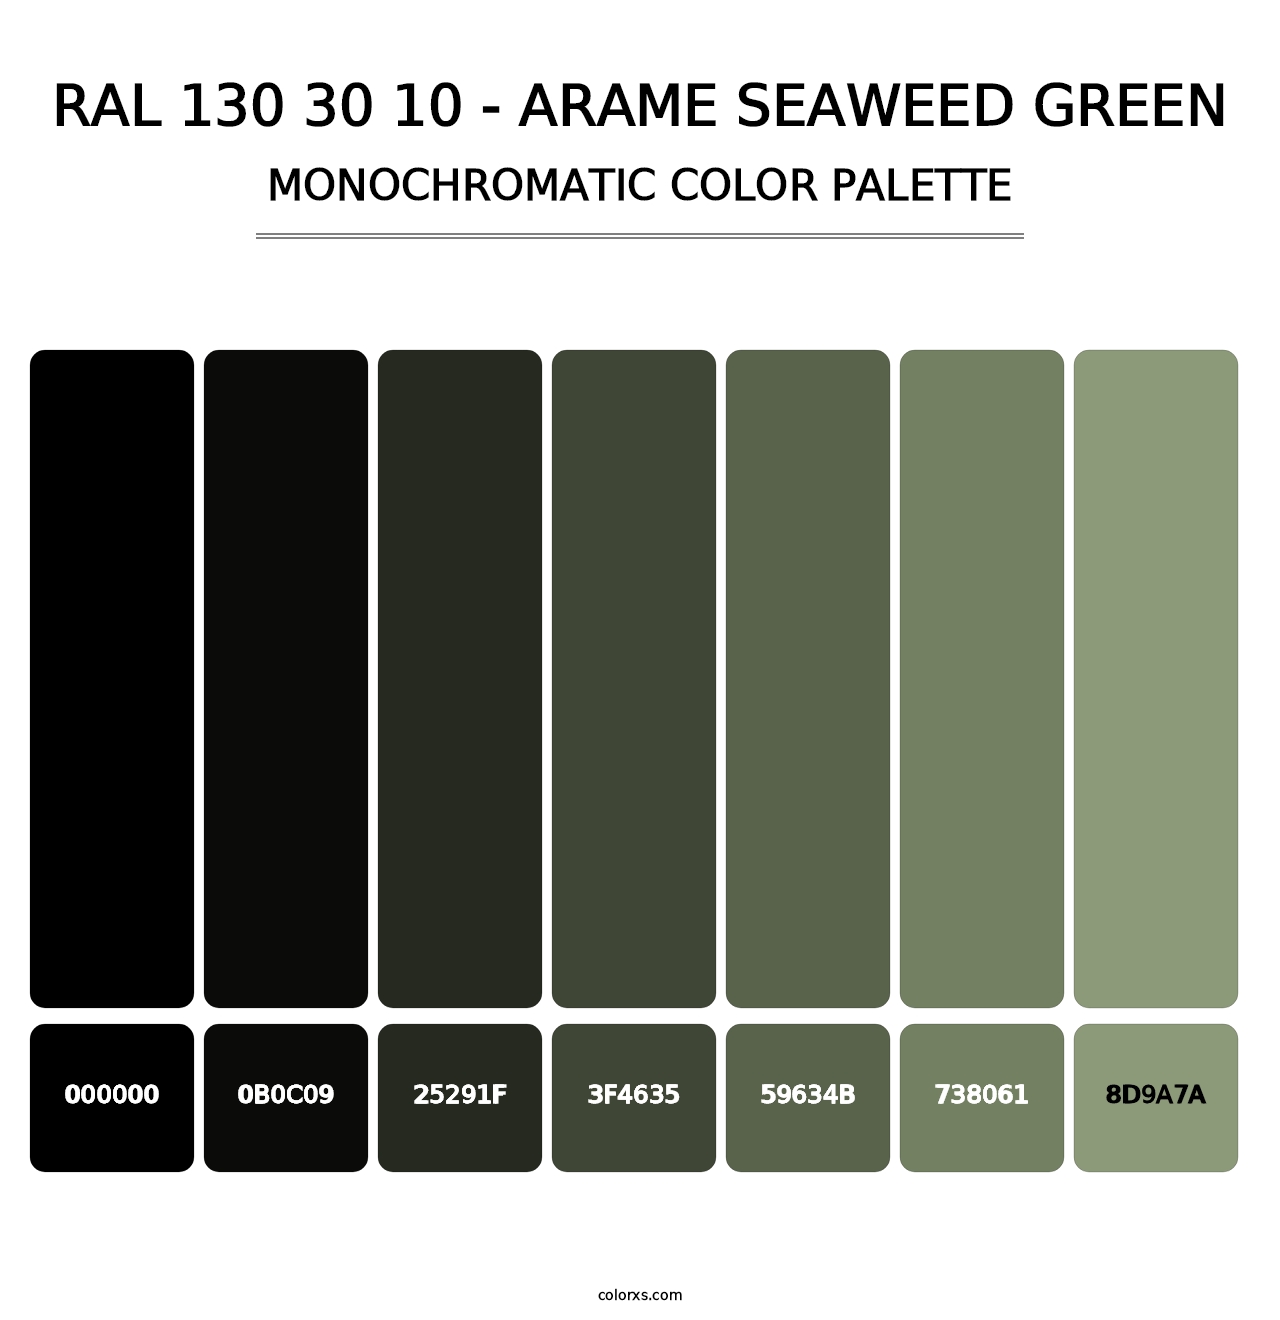 RAL 130 30 10 - Arame Seaweed Green - Monochromatic Color Palette